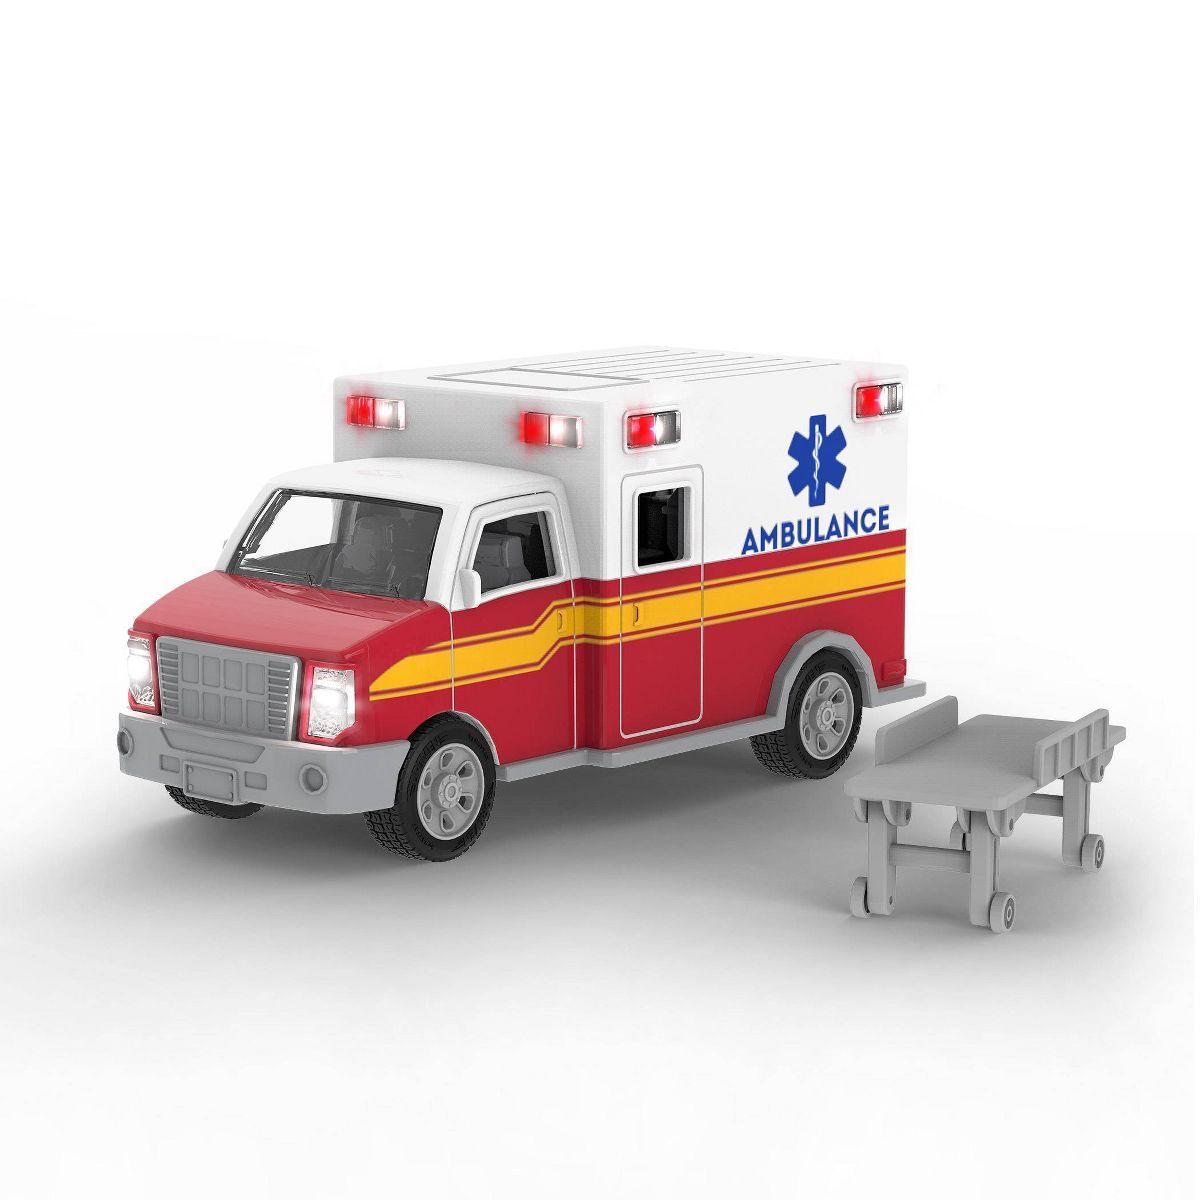 DRIVEN – Small Toy Emergency Vehicle – Micro Ambulance - White & Red | Target